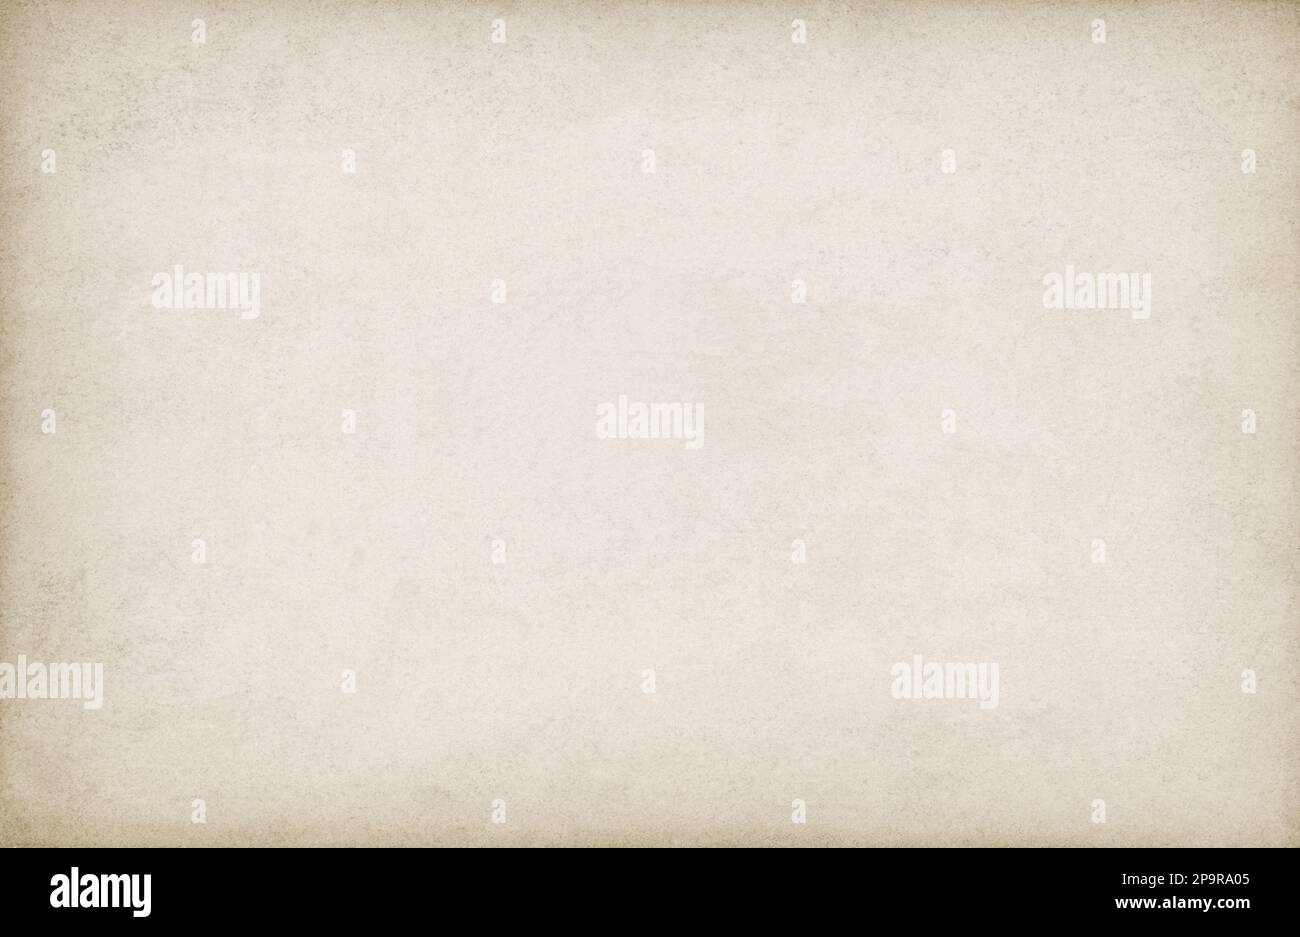 Vintage paper texture old grunge background Stock Photo